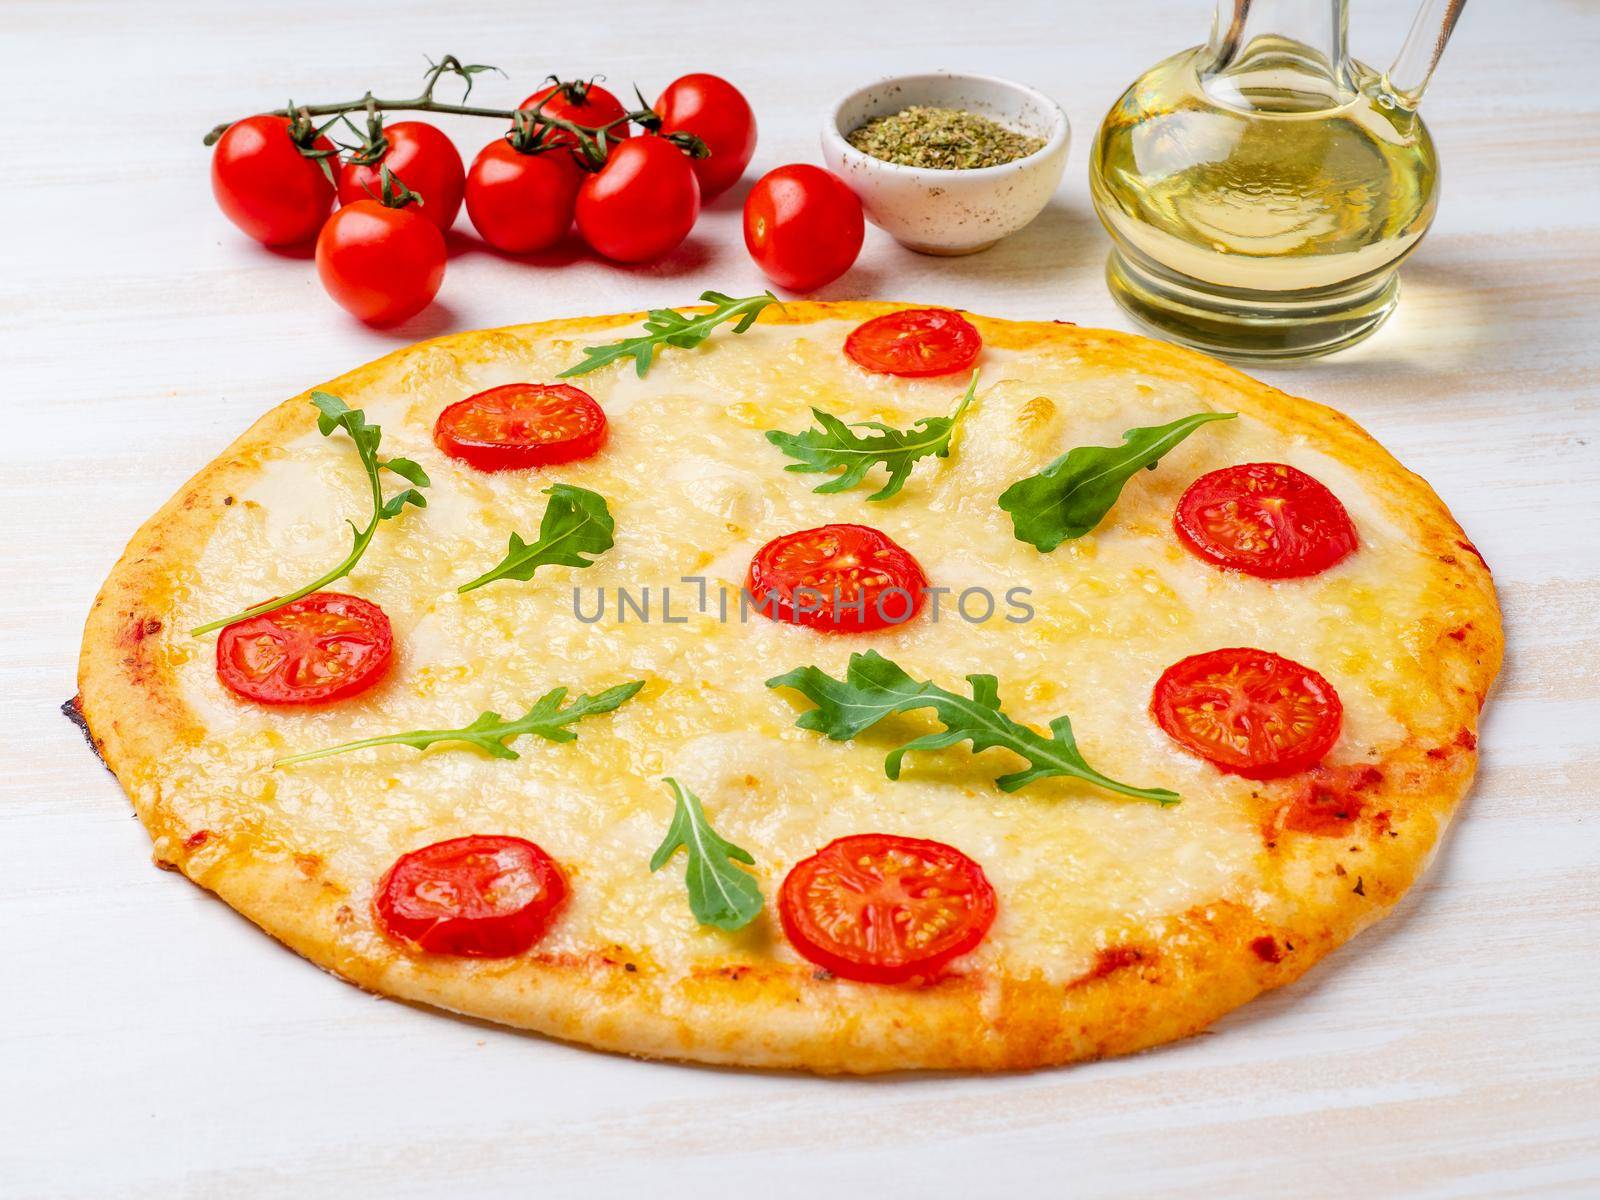 hot homemade Italian pizza margherita with mozzarella and tomatoes on white wooden table, side view.